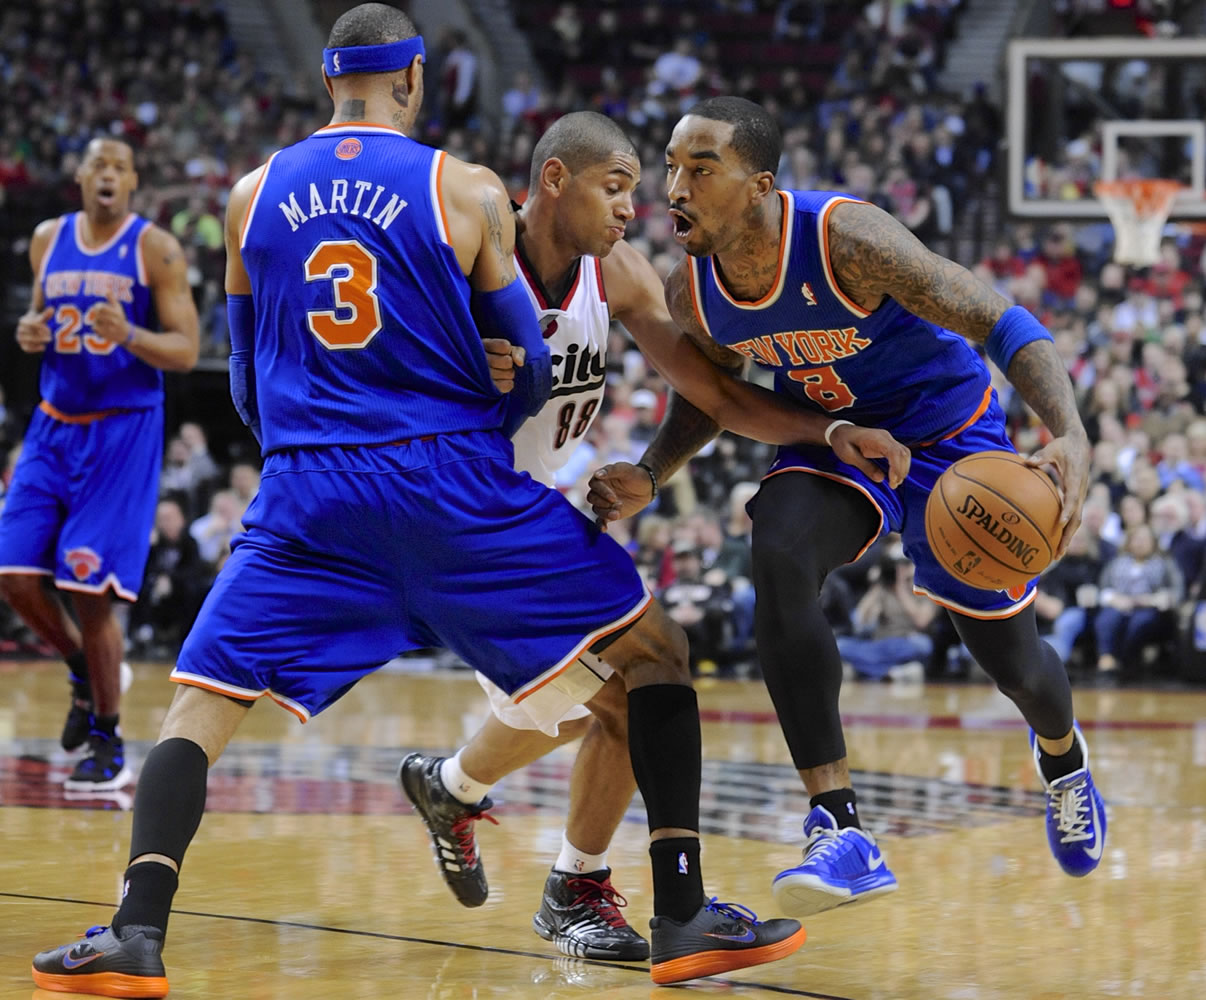 Blazers get important victory over Knicks - The Columbian